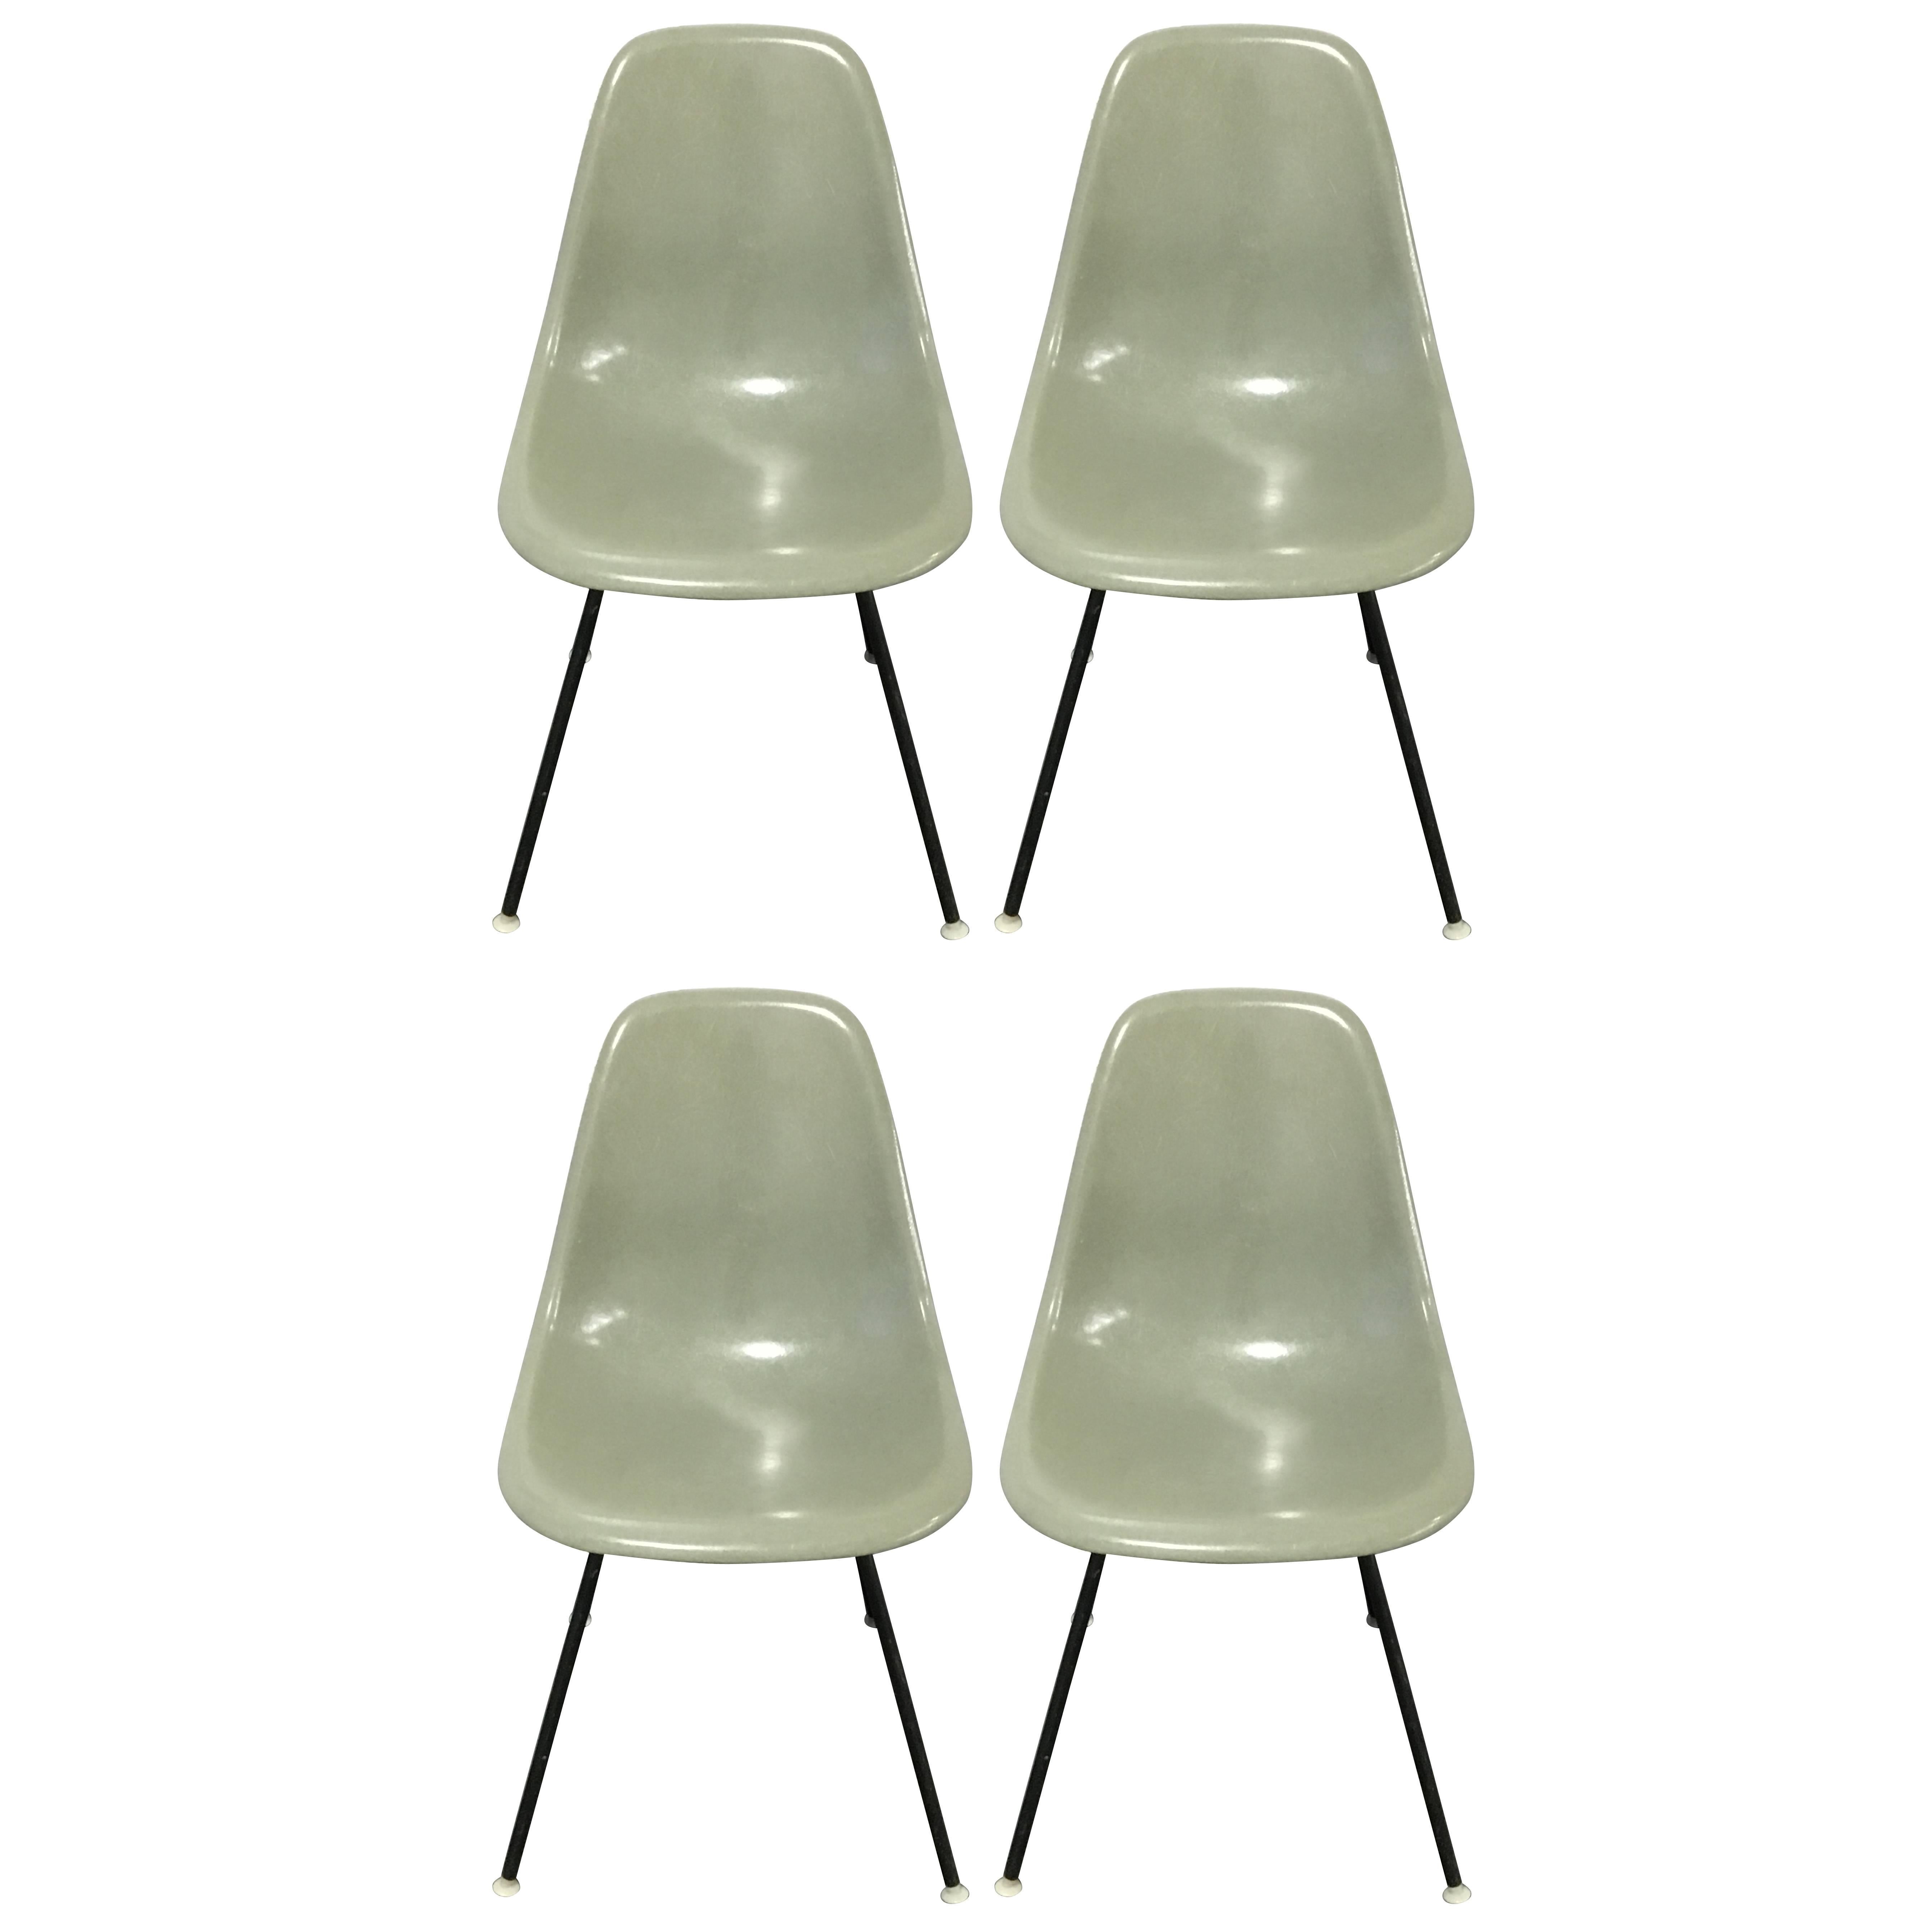 Four Herman Miller Eames Seafoam Green Dining Chairs